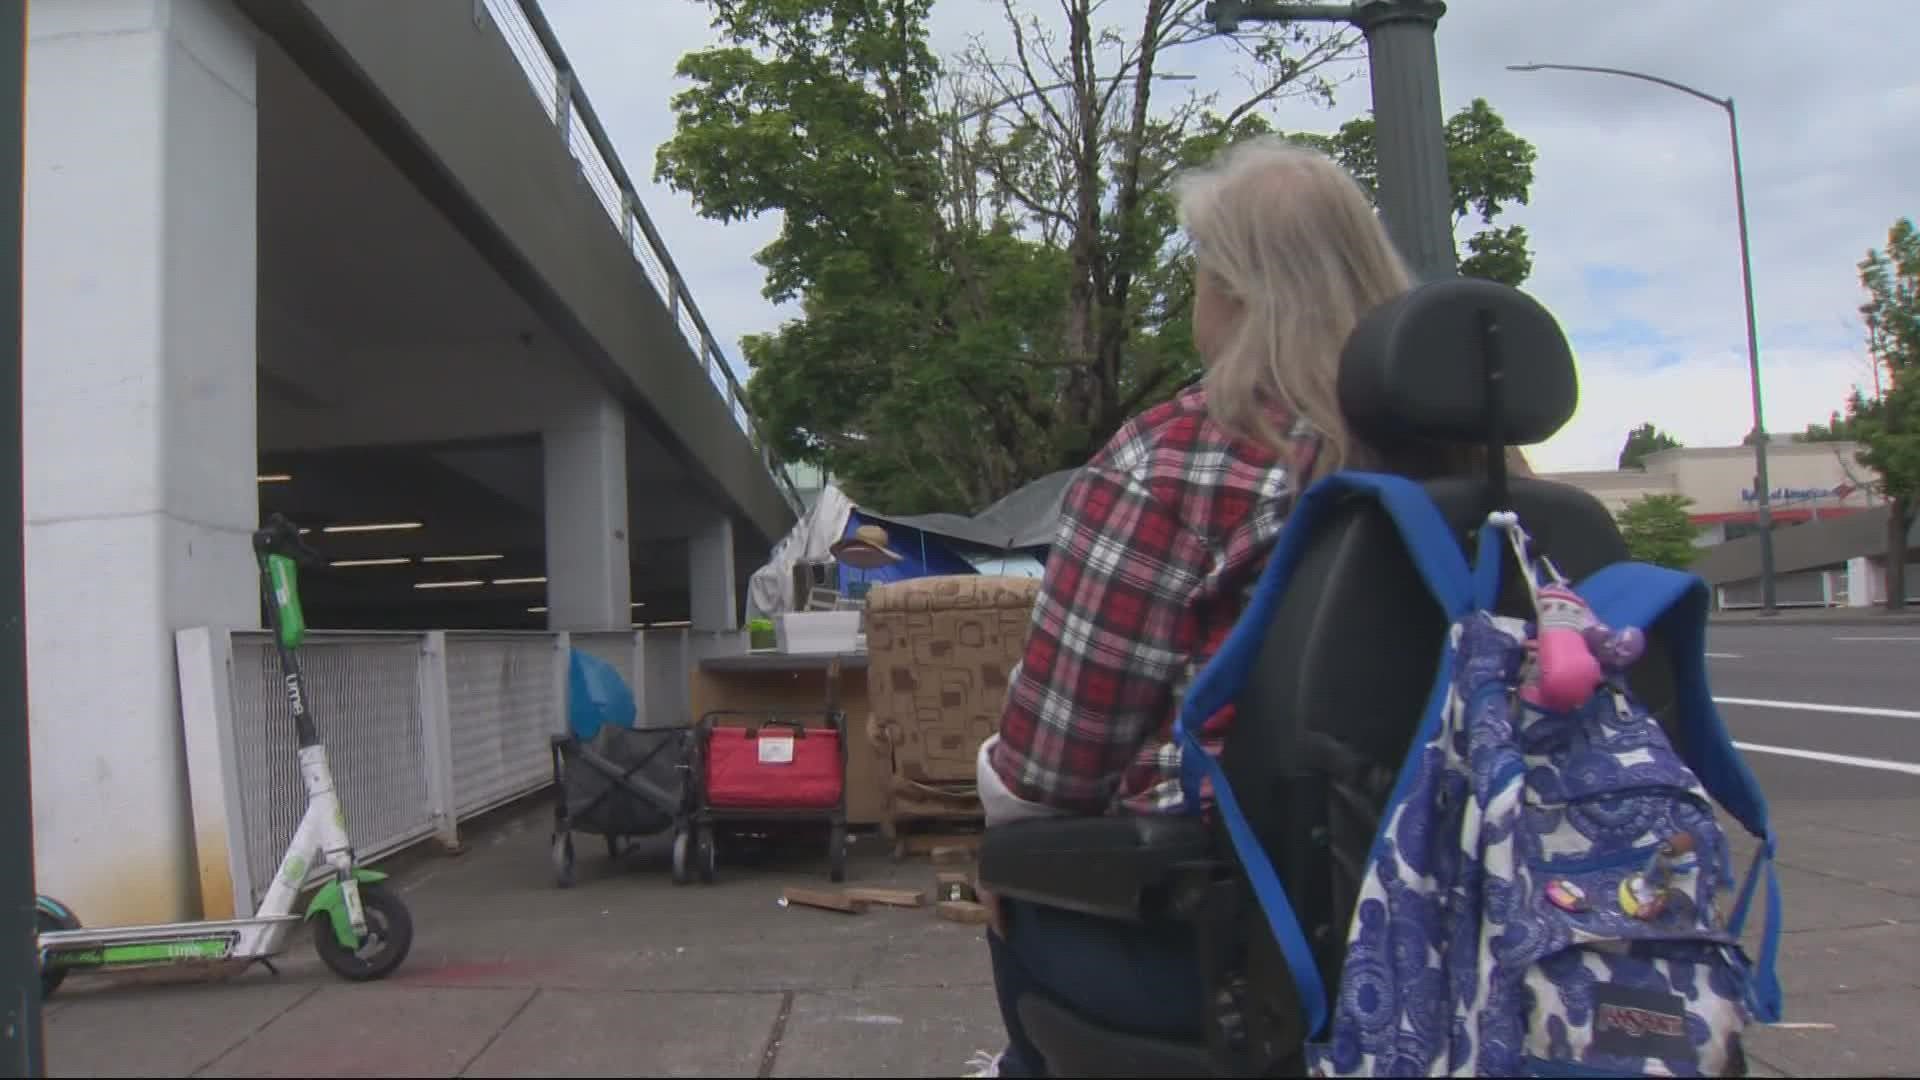 A group is suing the city, claiming tents block basic access for people with disabilities. There are a number of settlement meetings scheduled through January